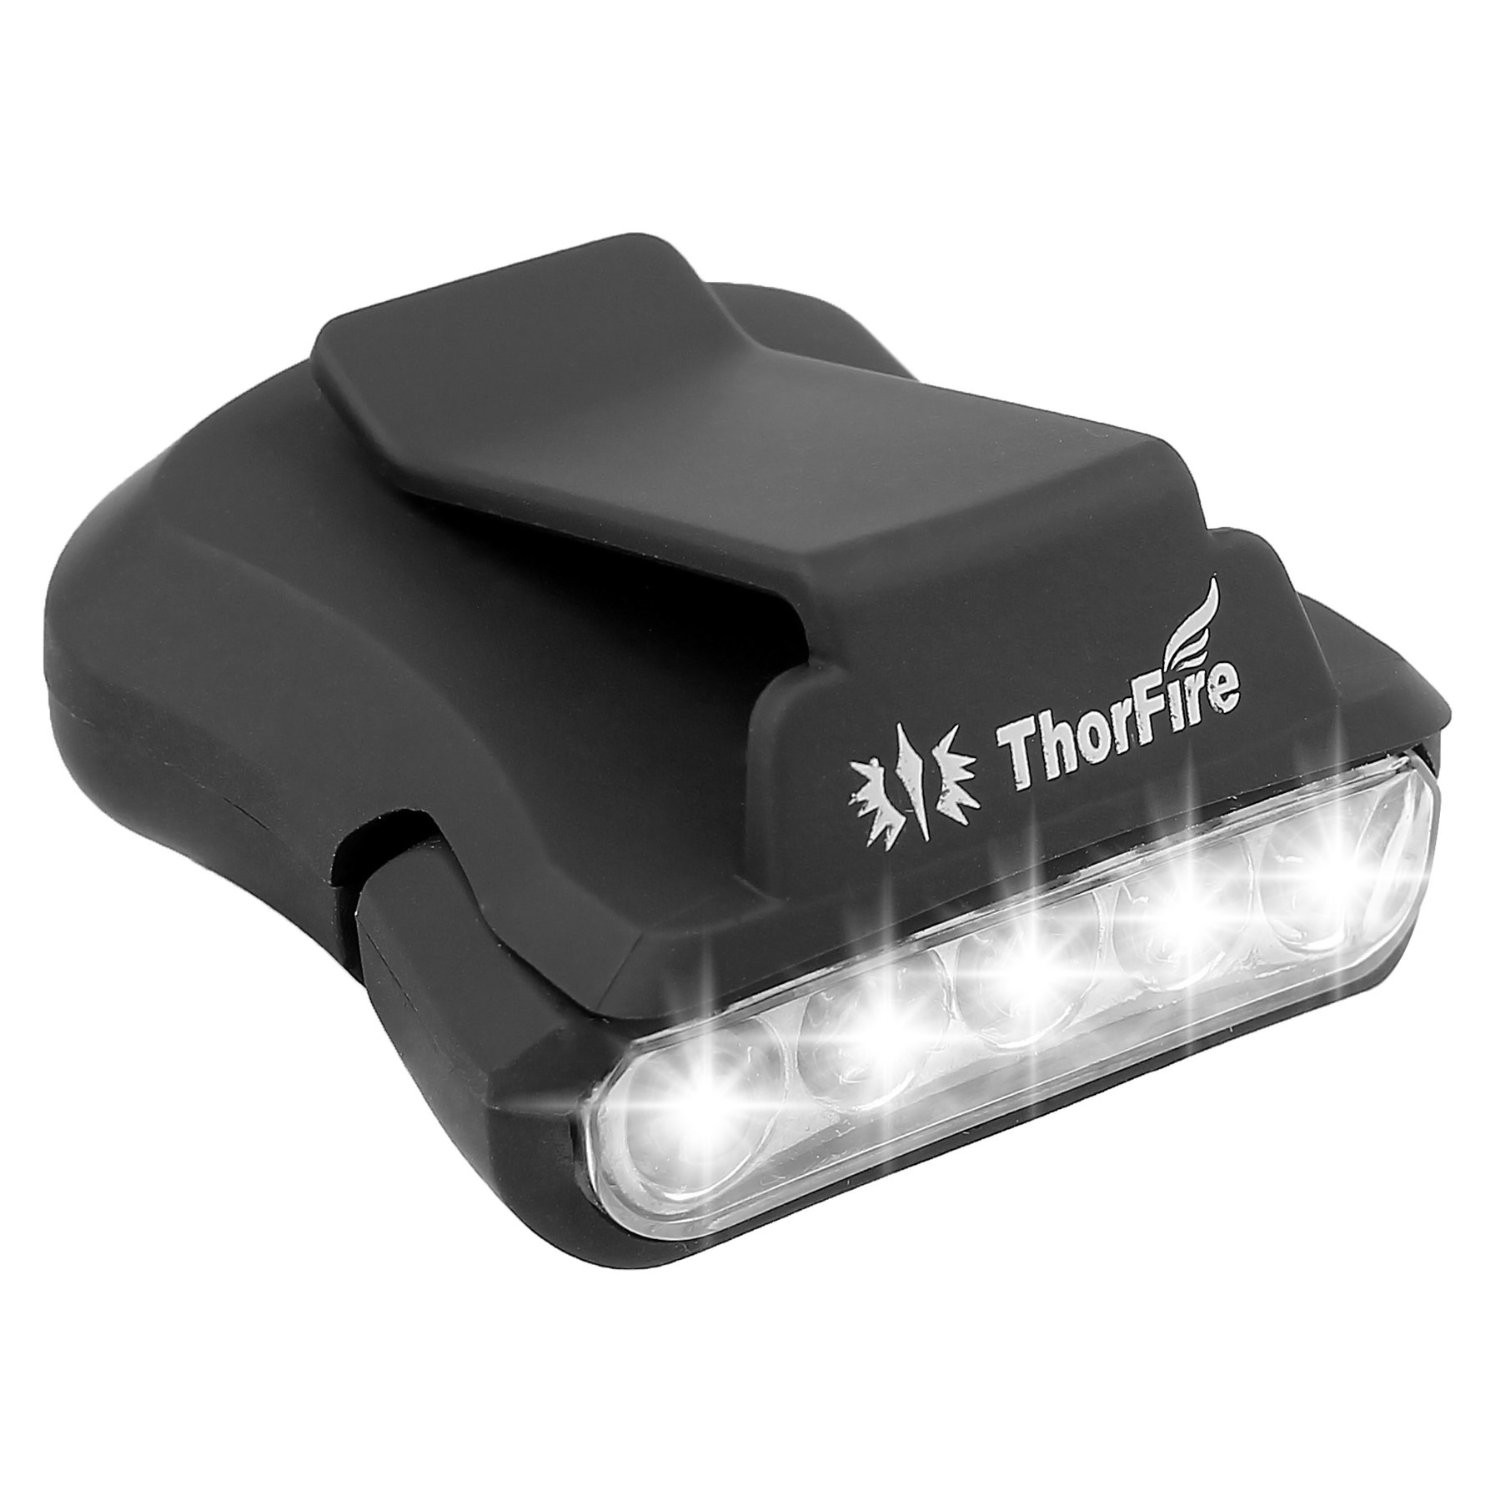 ThorFire-30LM-5-LED-Hat-Clip-Light-Hands-Free-Rotatable-Ball-Cap-Visor-Light-Perfect-for-Hunting-Cam-1114220